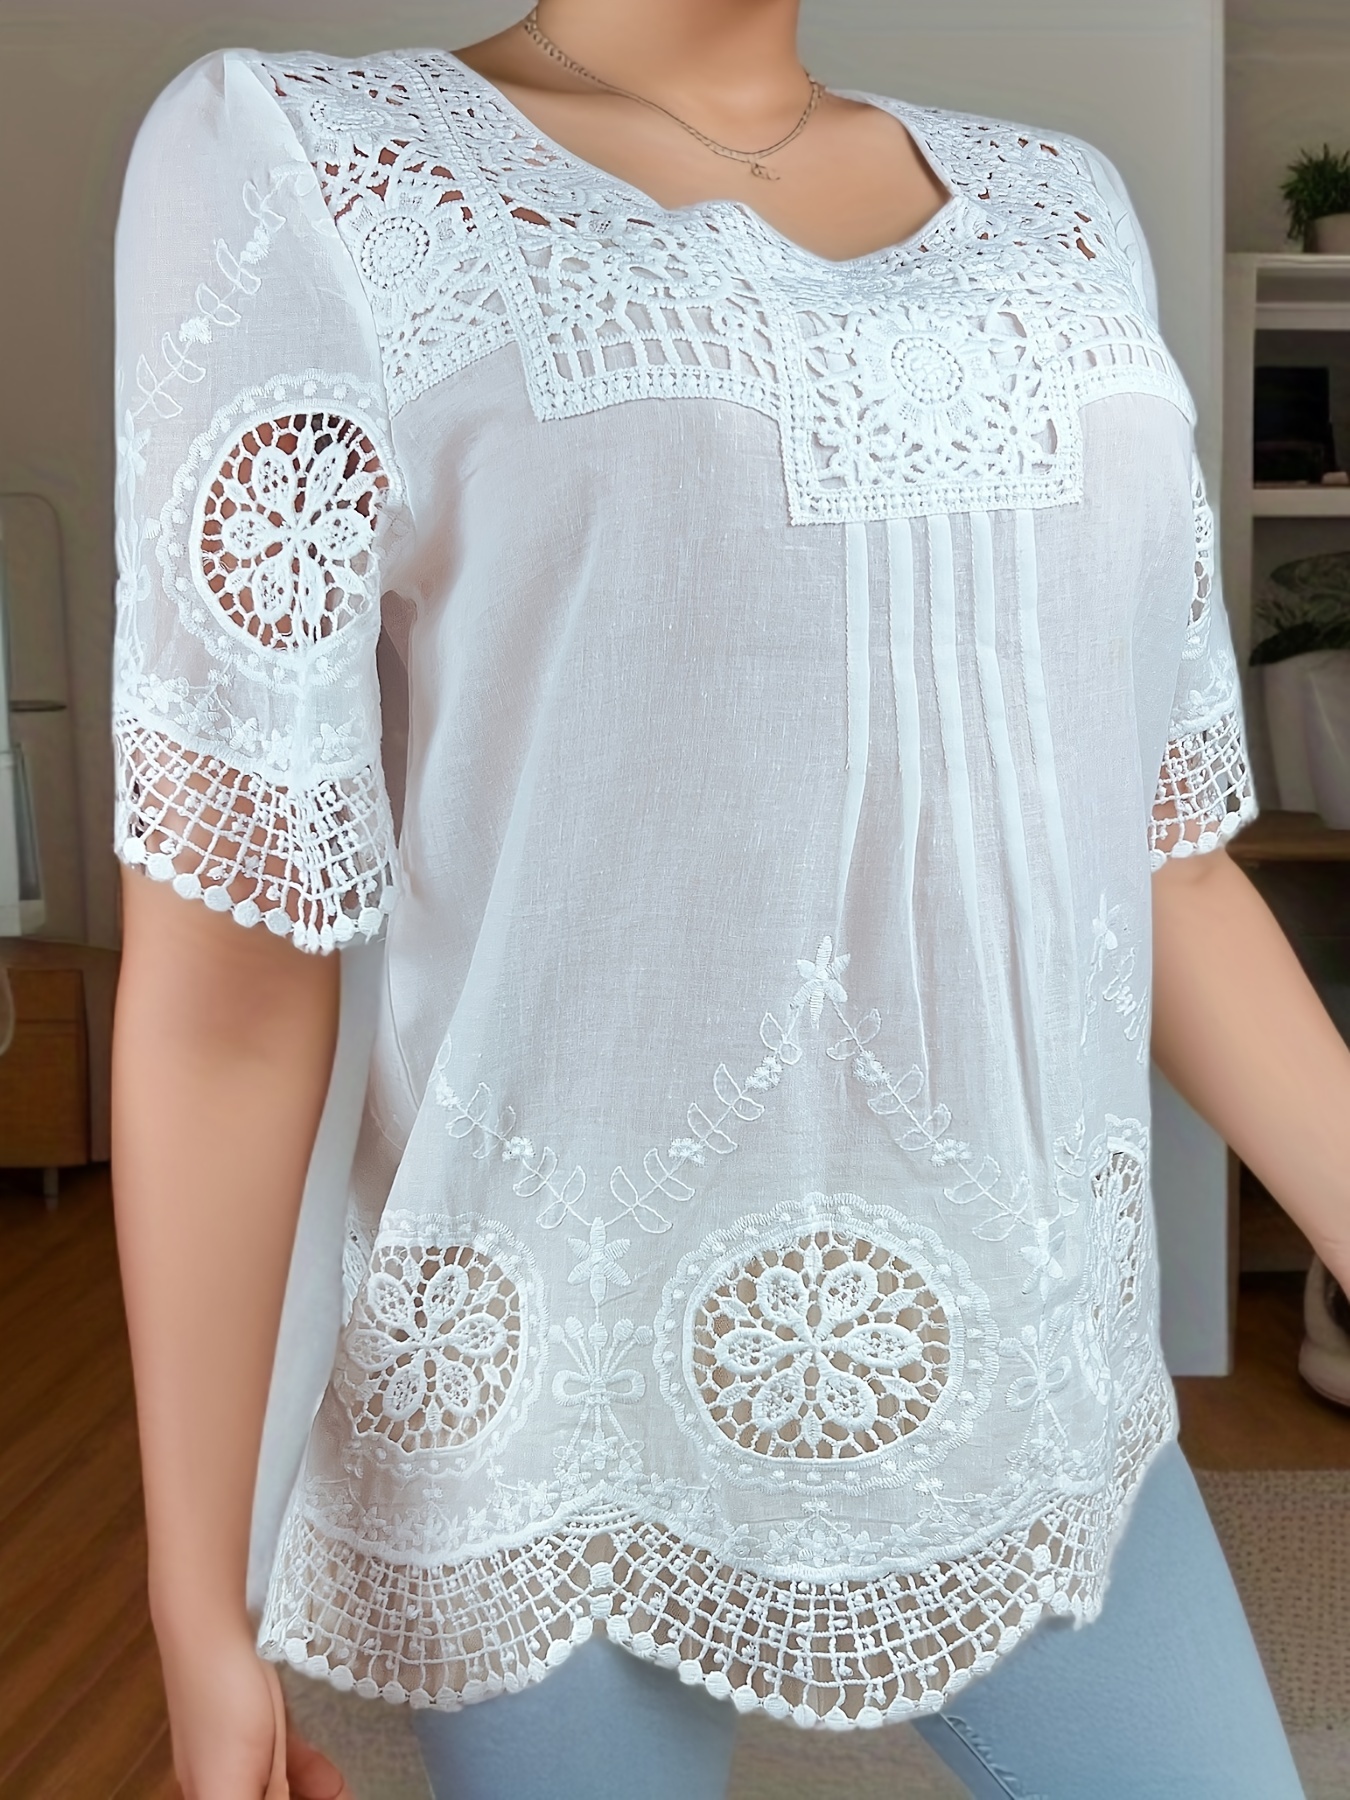 Shirt with Eyelet Embroidery - White - Ladies